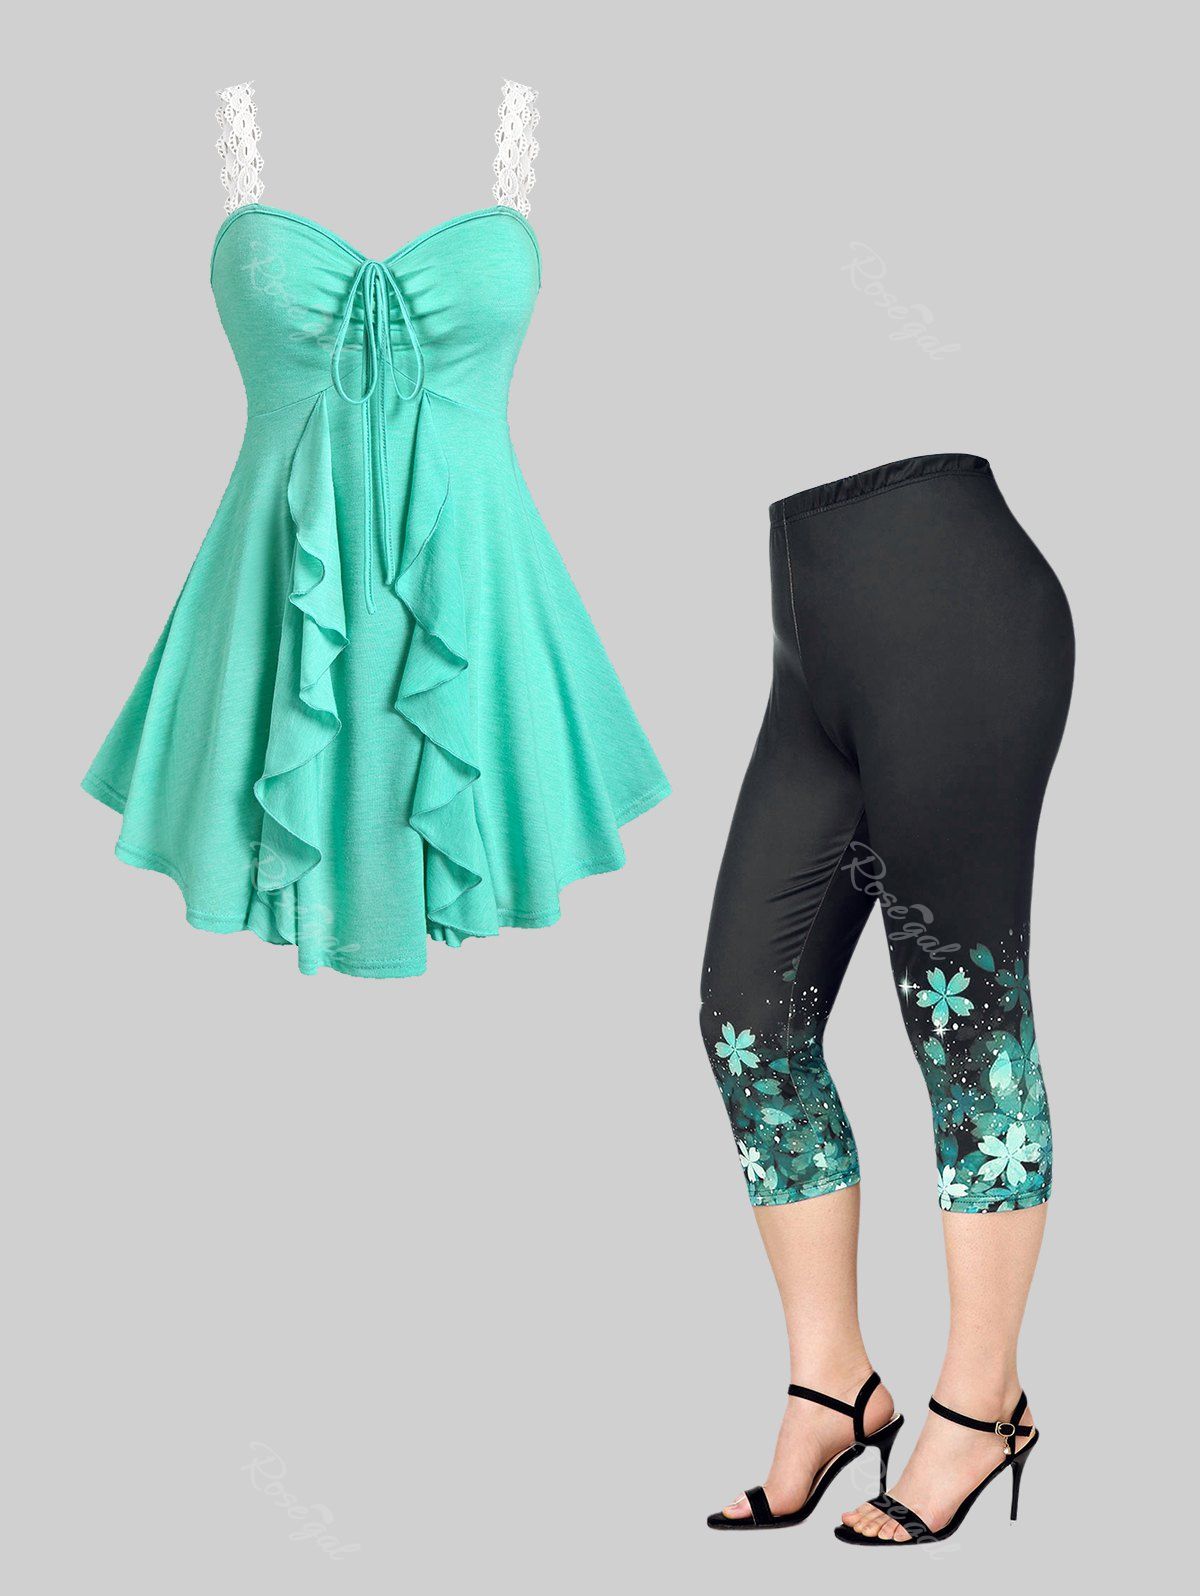 Shop Lace Straps Cinched Ruffle Tank Top and Floral Print Capri Leggings Plus Size Summer Outfit  